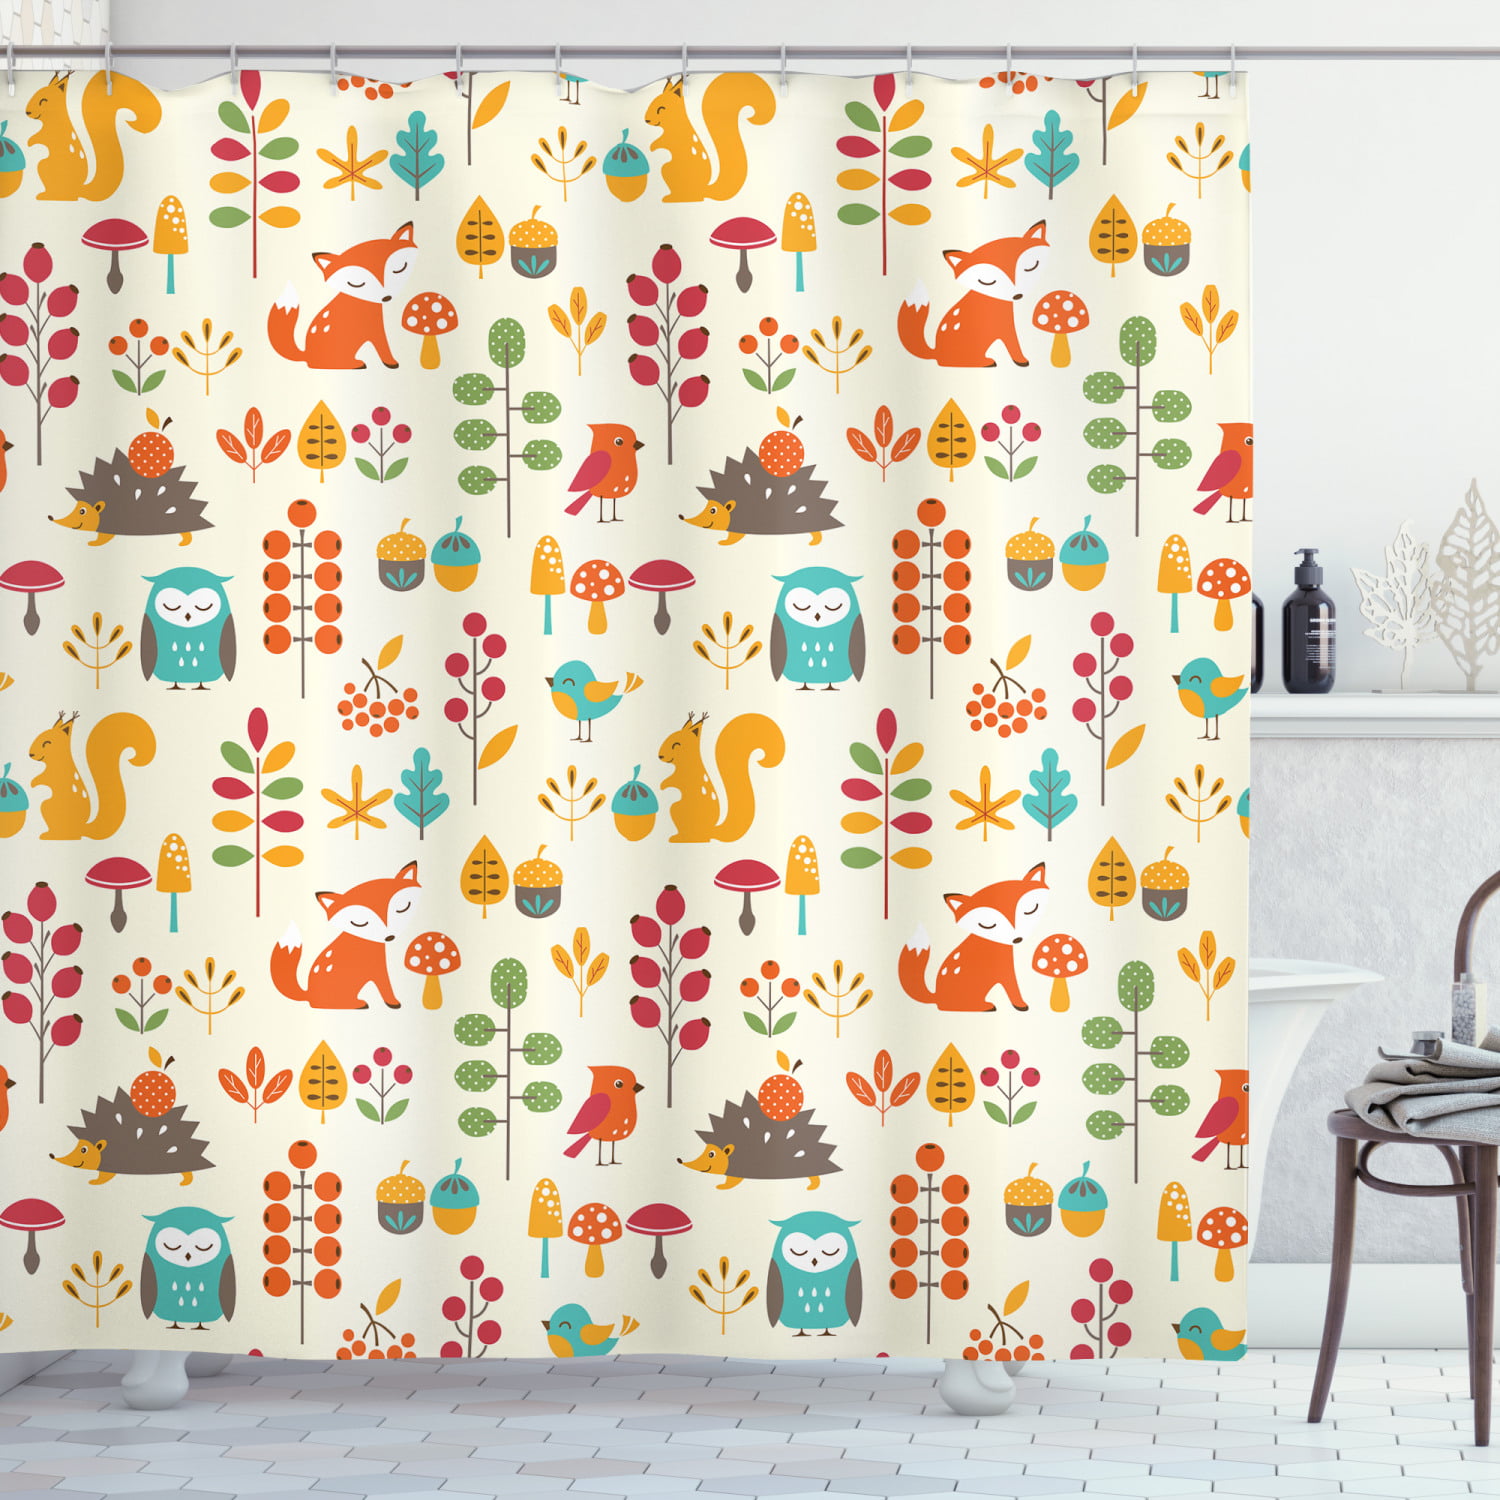 Fox And Leaves In Autumn Fabric Shower Curtain Set Bathroom Decor 71Inch Long 